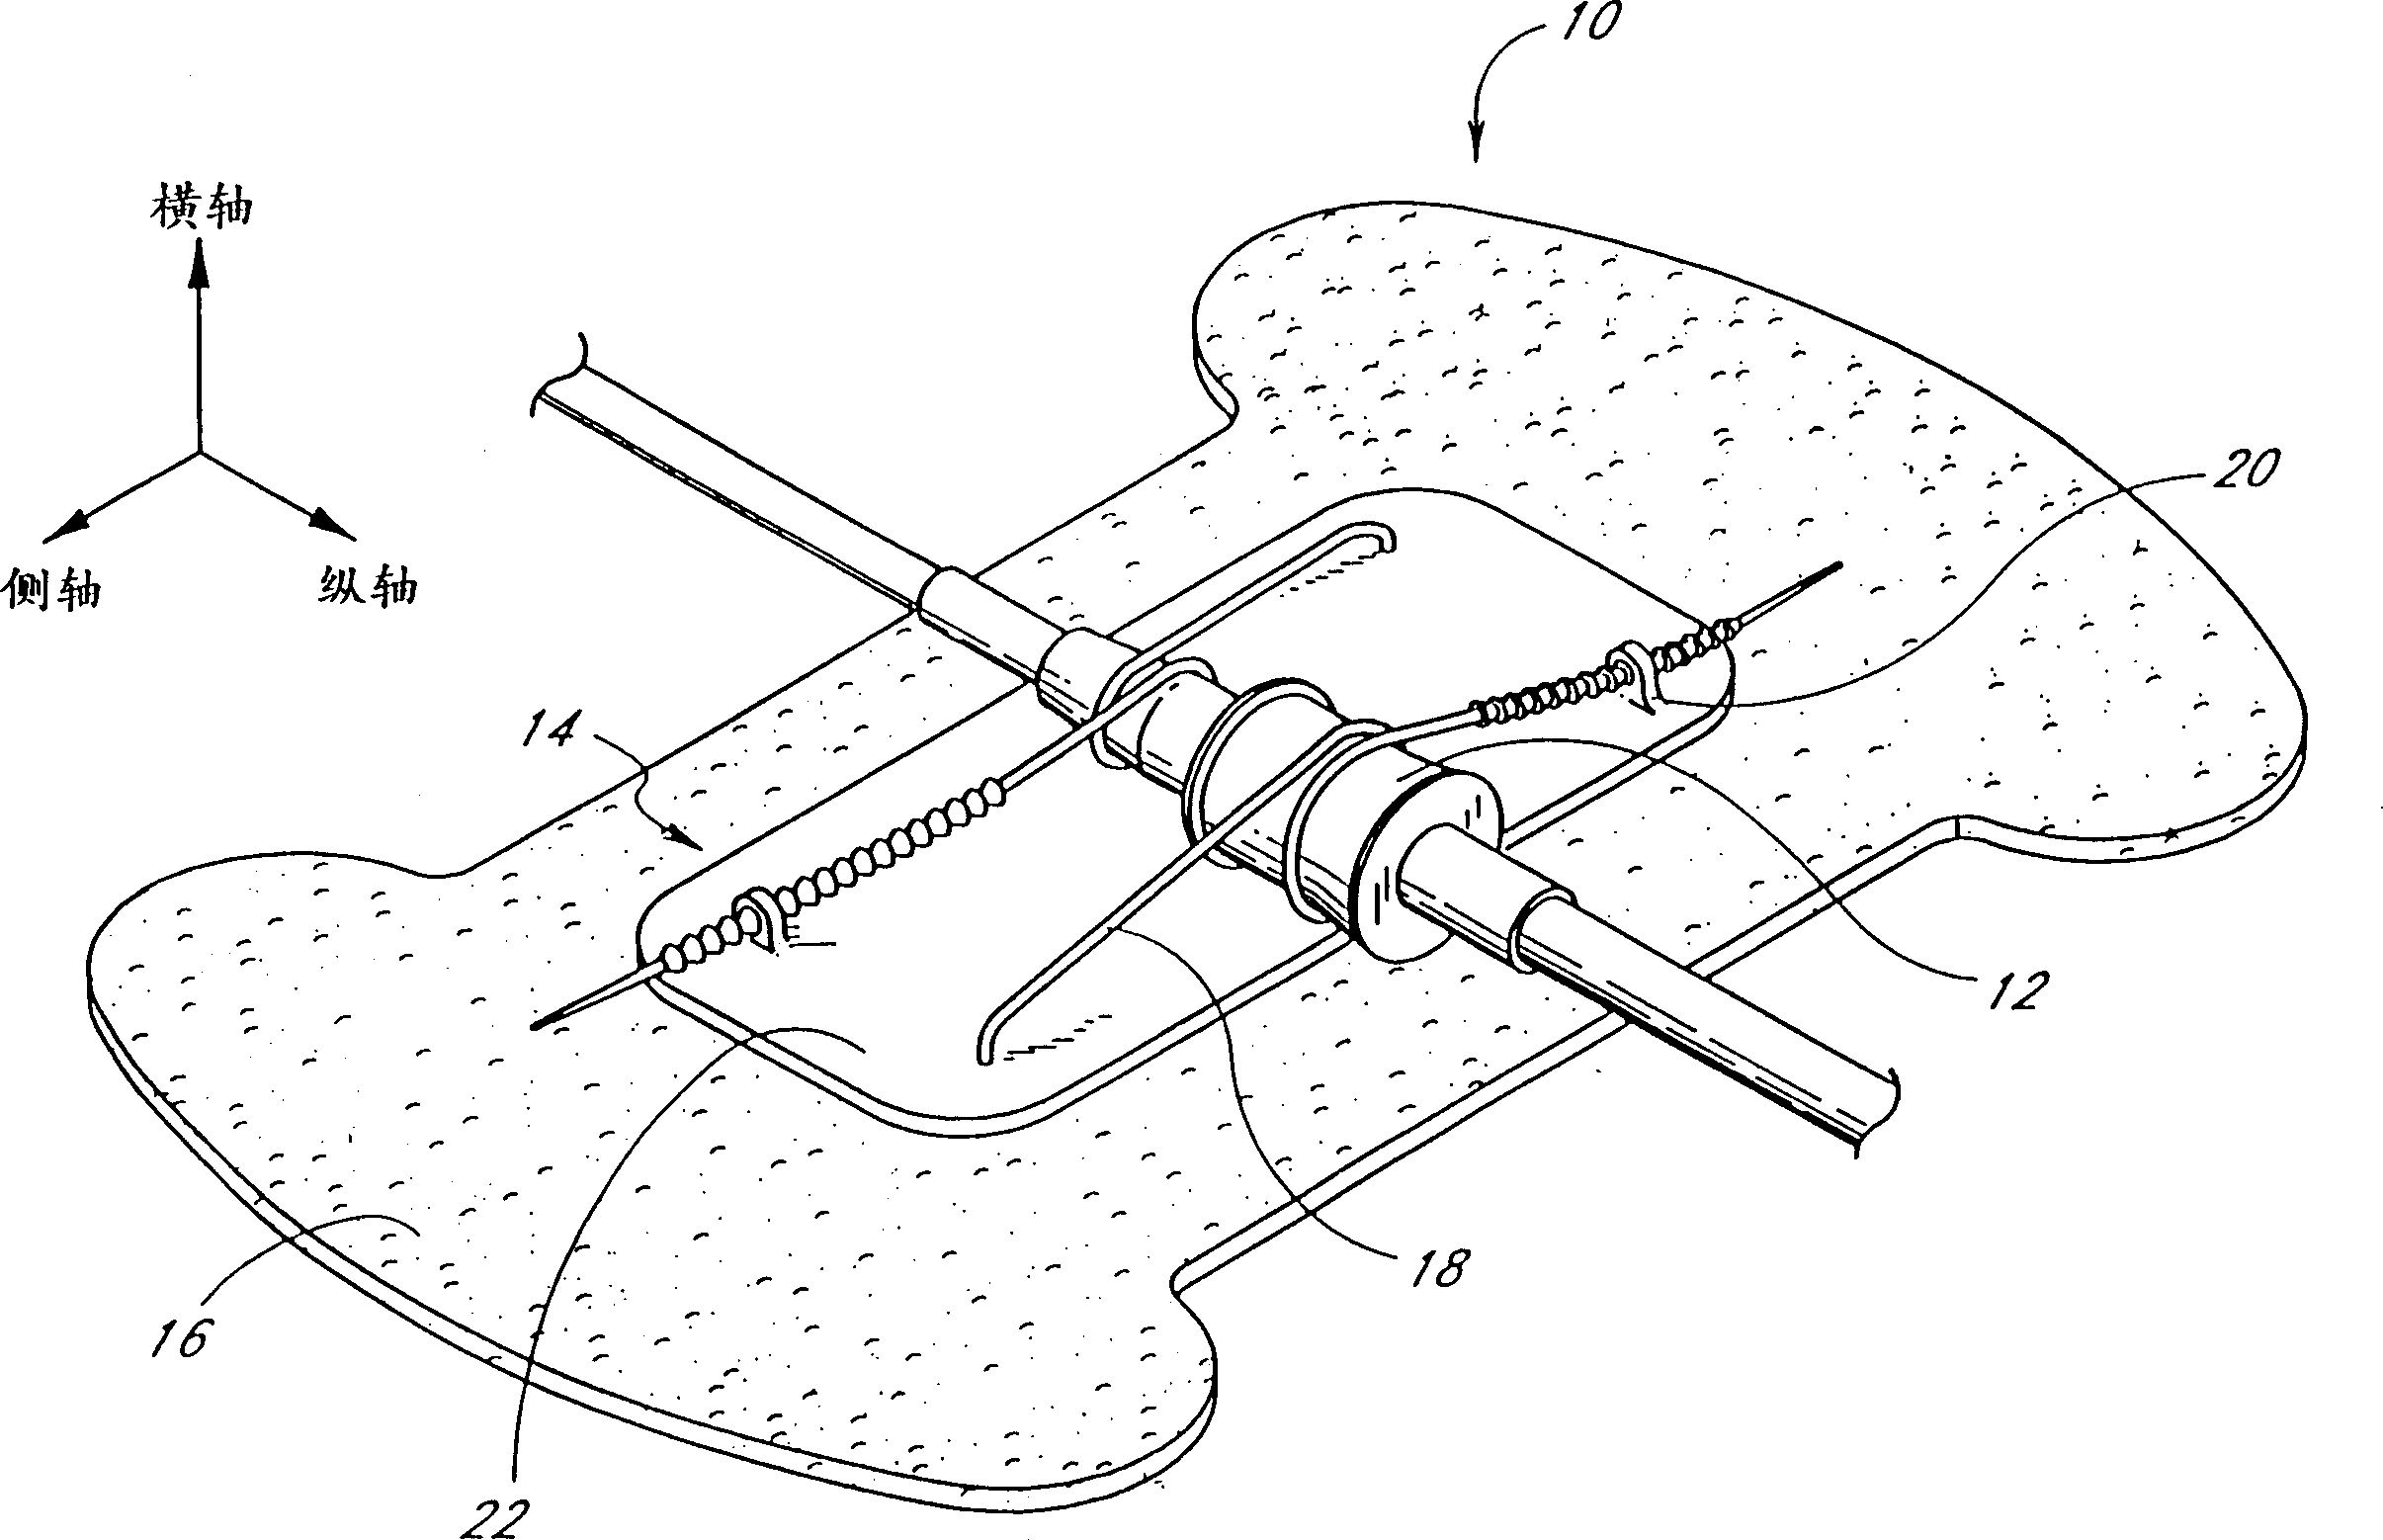 Cathether securement device